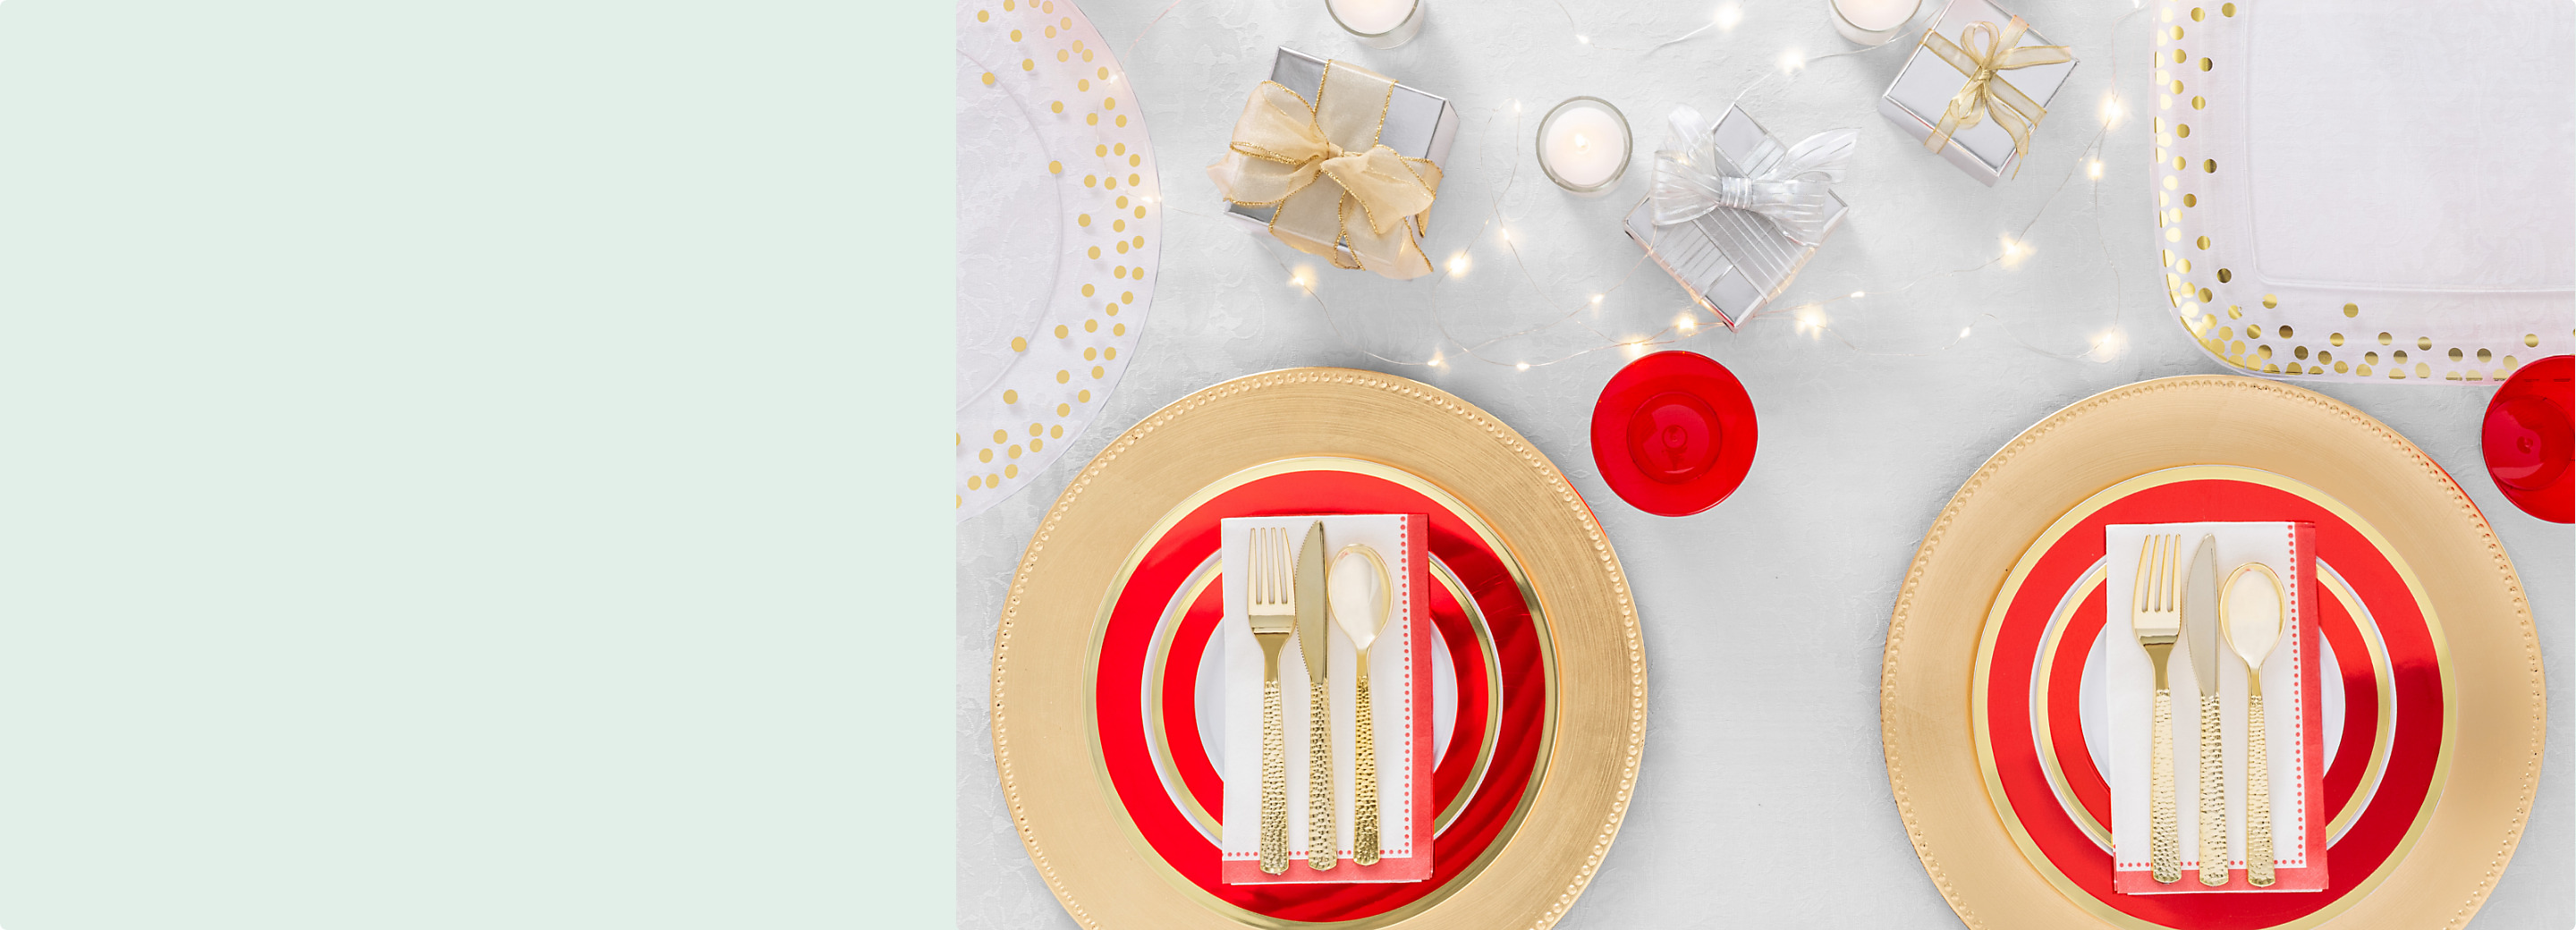 A tabletop set with a variety of white, gold and red tableware including premium plastic charger plates, metallic polka dots platters.